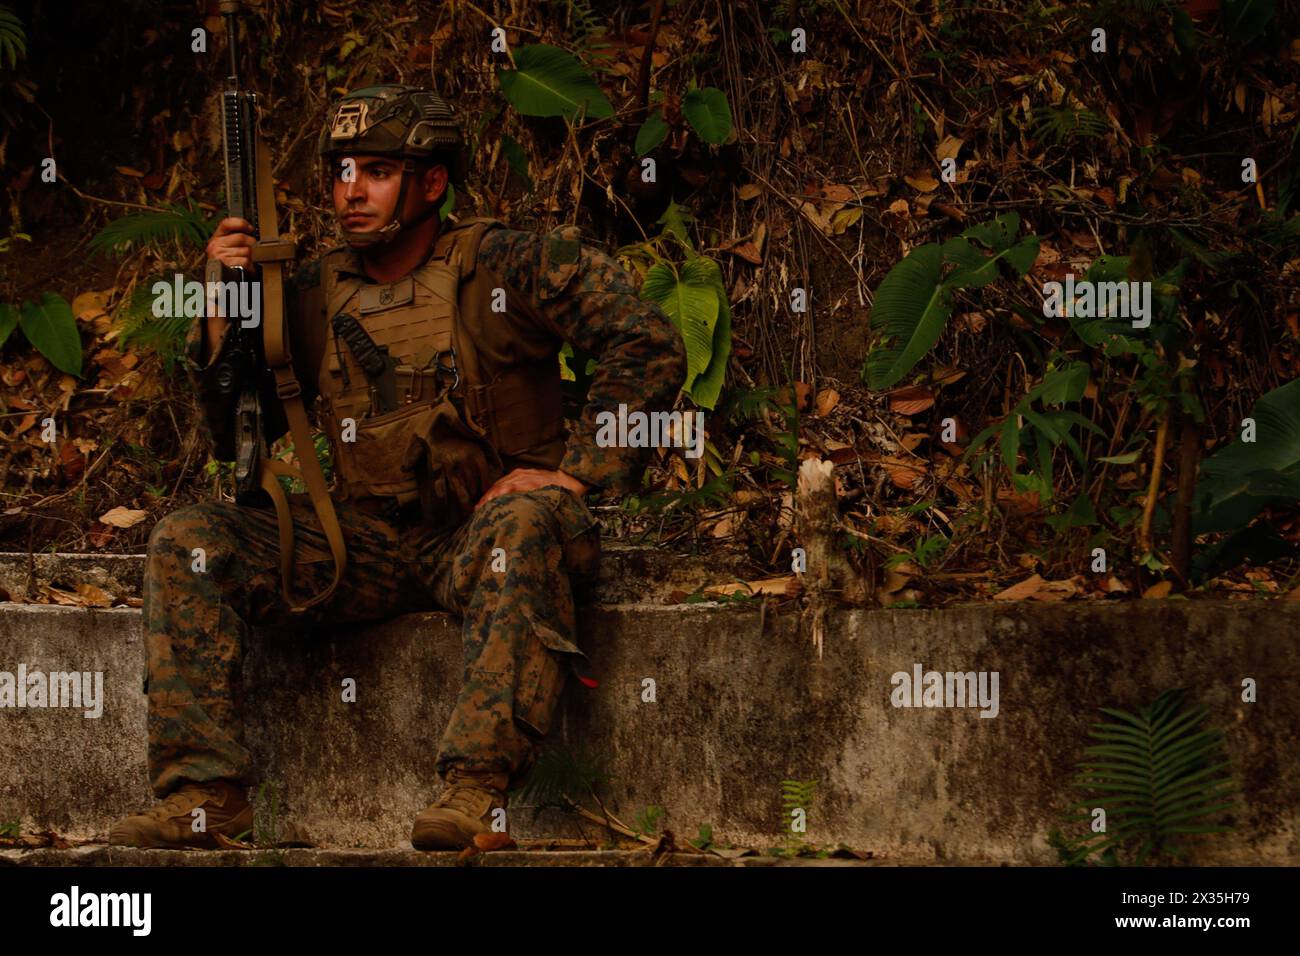 U.S. Marine Corps Lance Cpl. Carlos Navarrete, a rifleman with Echo Company, 2nd Battalion, 1st Marine Regiment, 1st Marine Division, participates in jungle operations and survival training during Marine Exercise 2024 near Cotabato City, Mindanao, Philippines, April 12, 2024. MAREX 2024 is a bilateral exercise between the U.S. Marine Corps and the Philippine Marine Corps designed to further enhance relationships, interoperability, and combined arms capabilities in a realistic training environment. Navarrete is a native of Arizona. (U.S. Marine Corps photo by Sgt. Ryan Hageali) Stock Photo